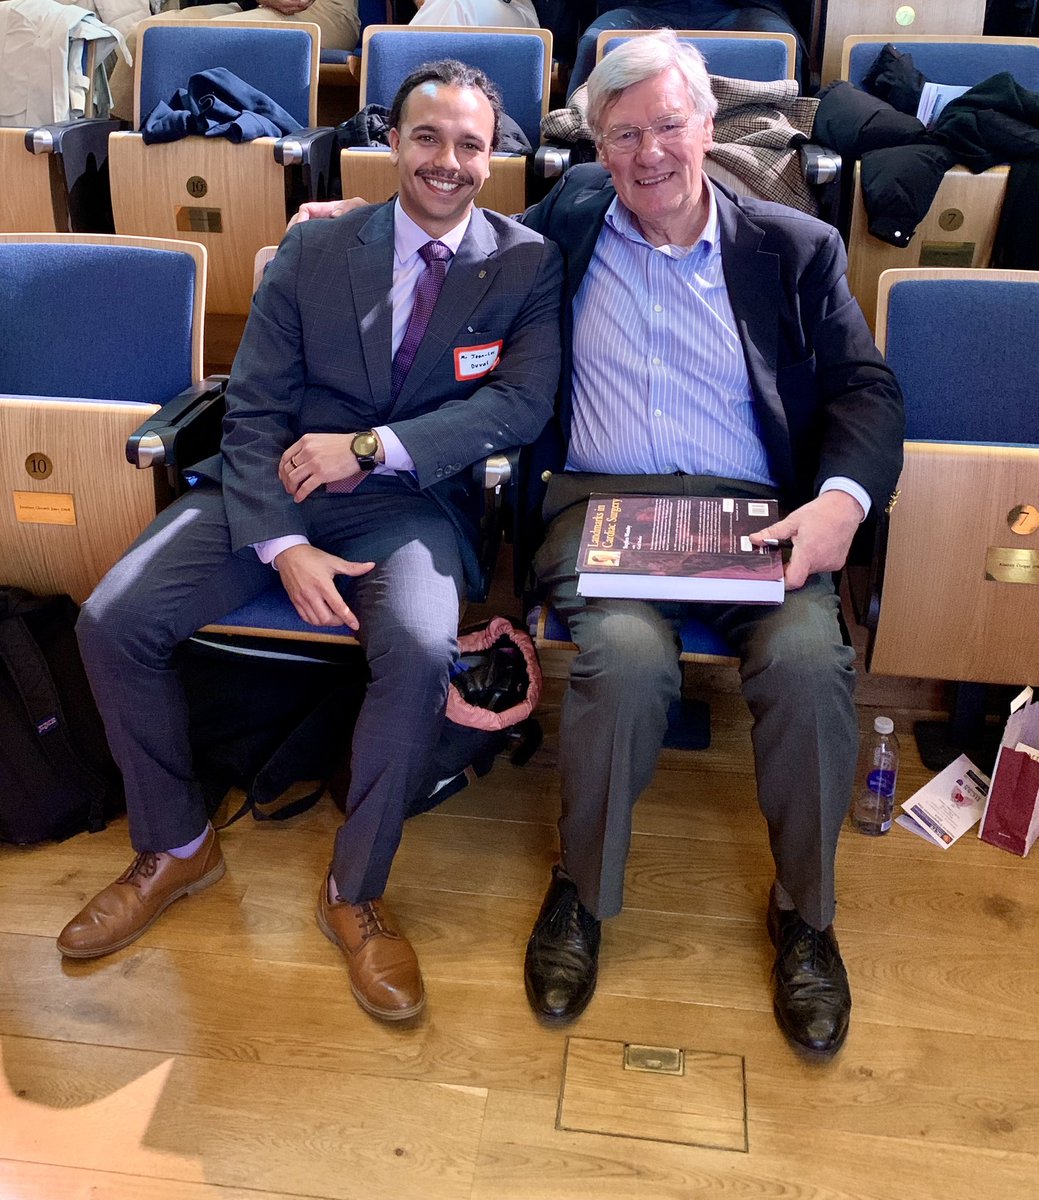 Honoured to be invited to speak at the @SCTSINSINC Student Engagement day in Oxford today. Privileged to share the stage with such eminent speakers, including the one and only Professor Westaby. The future of our speciality is bright!